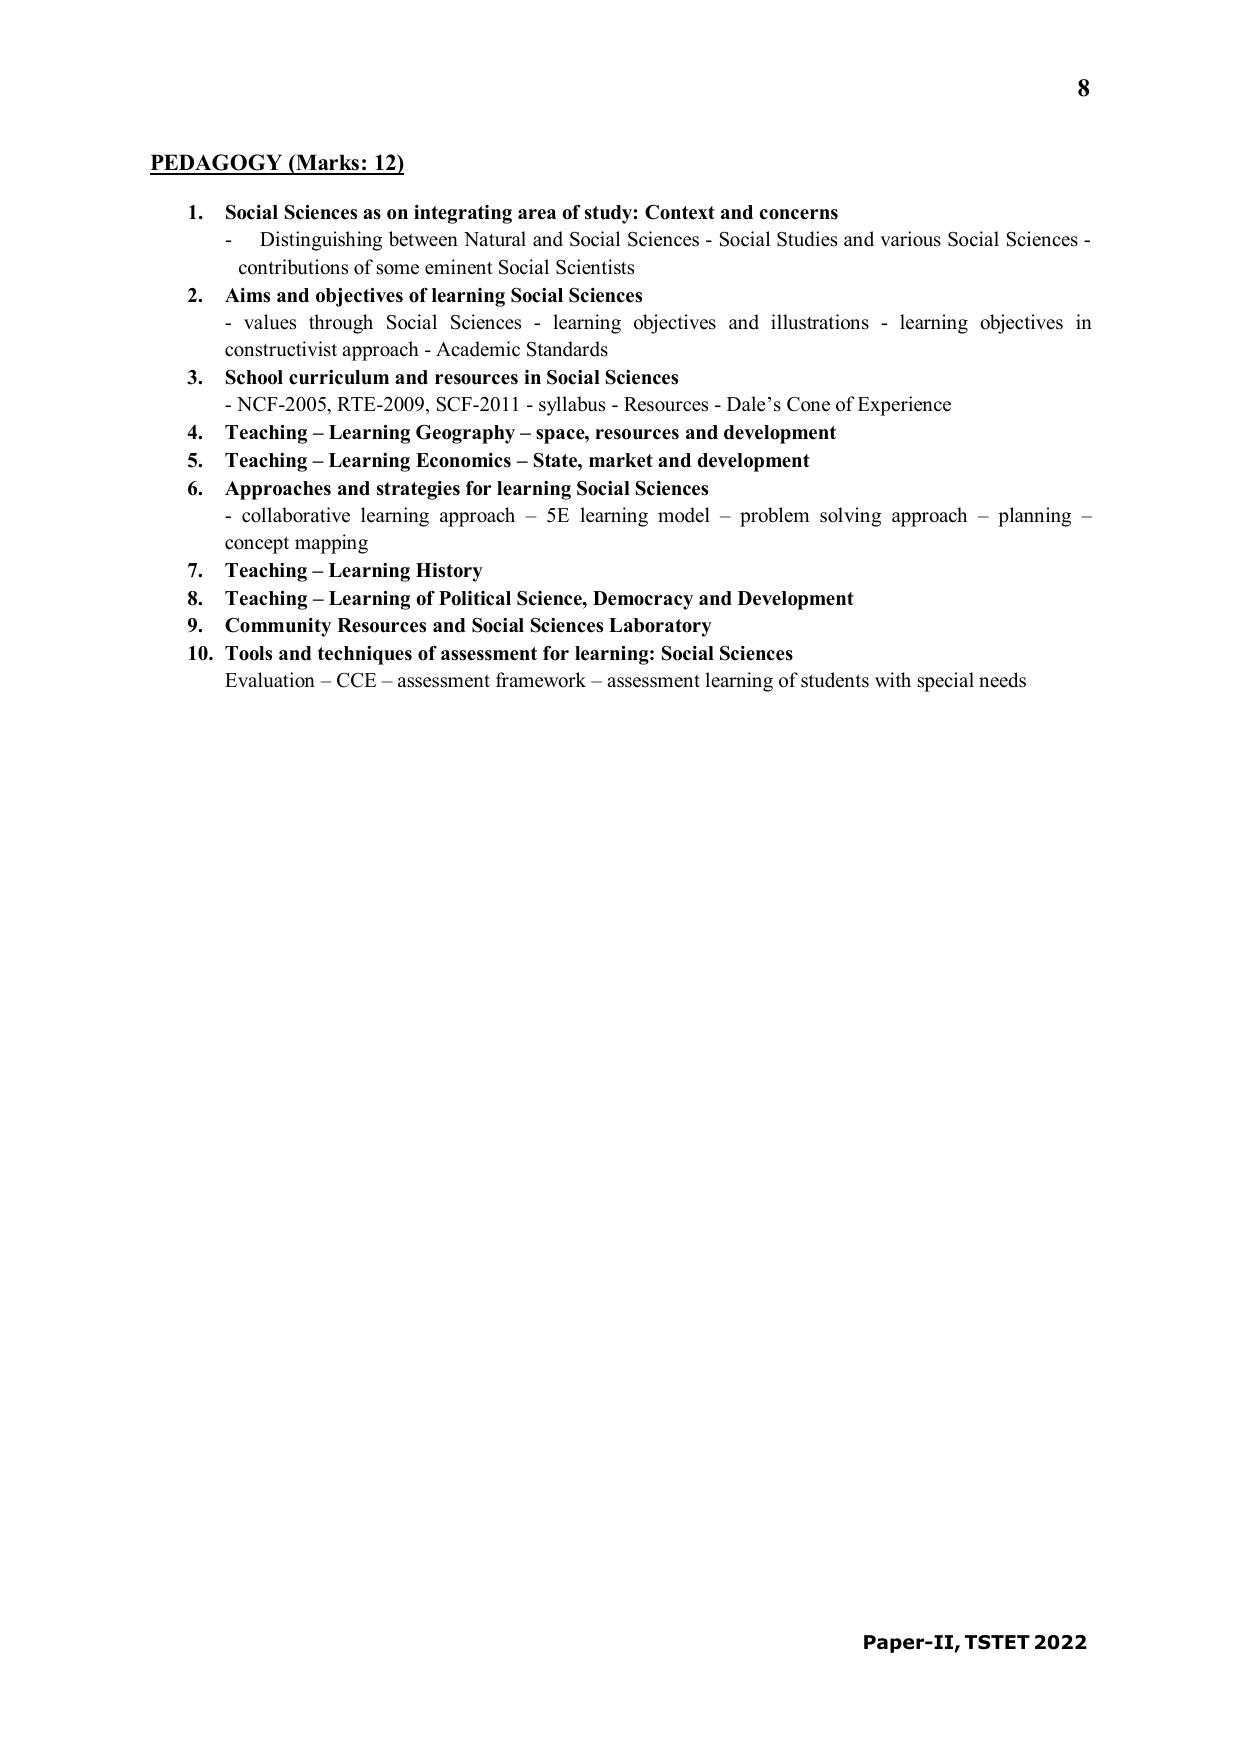 TS TET Syllabus for Paper 2 (Tamil) - Page 8